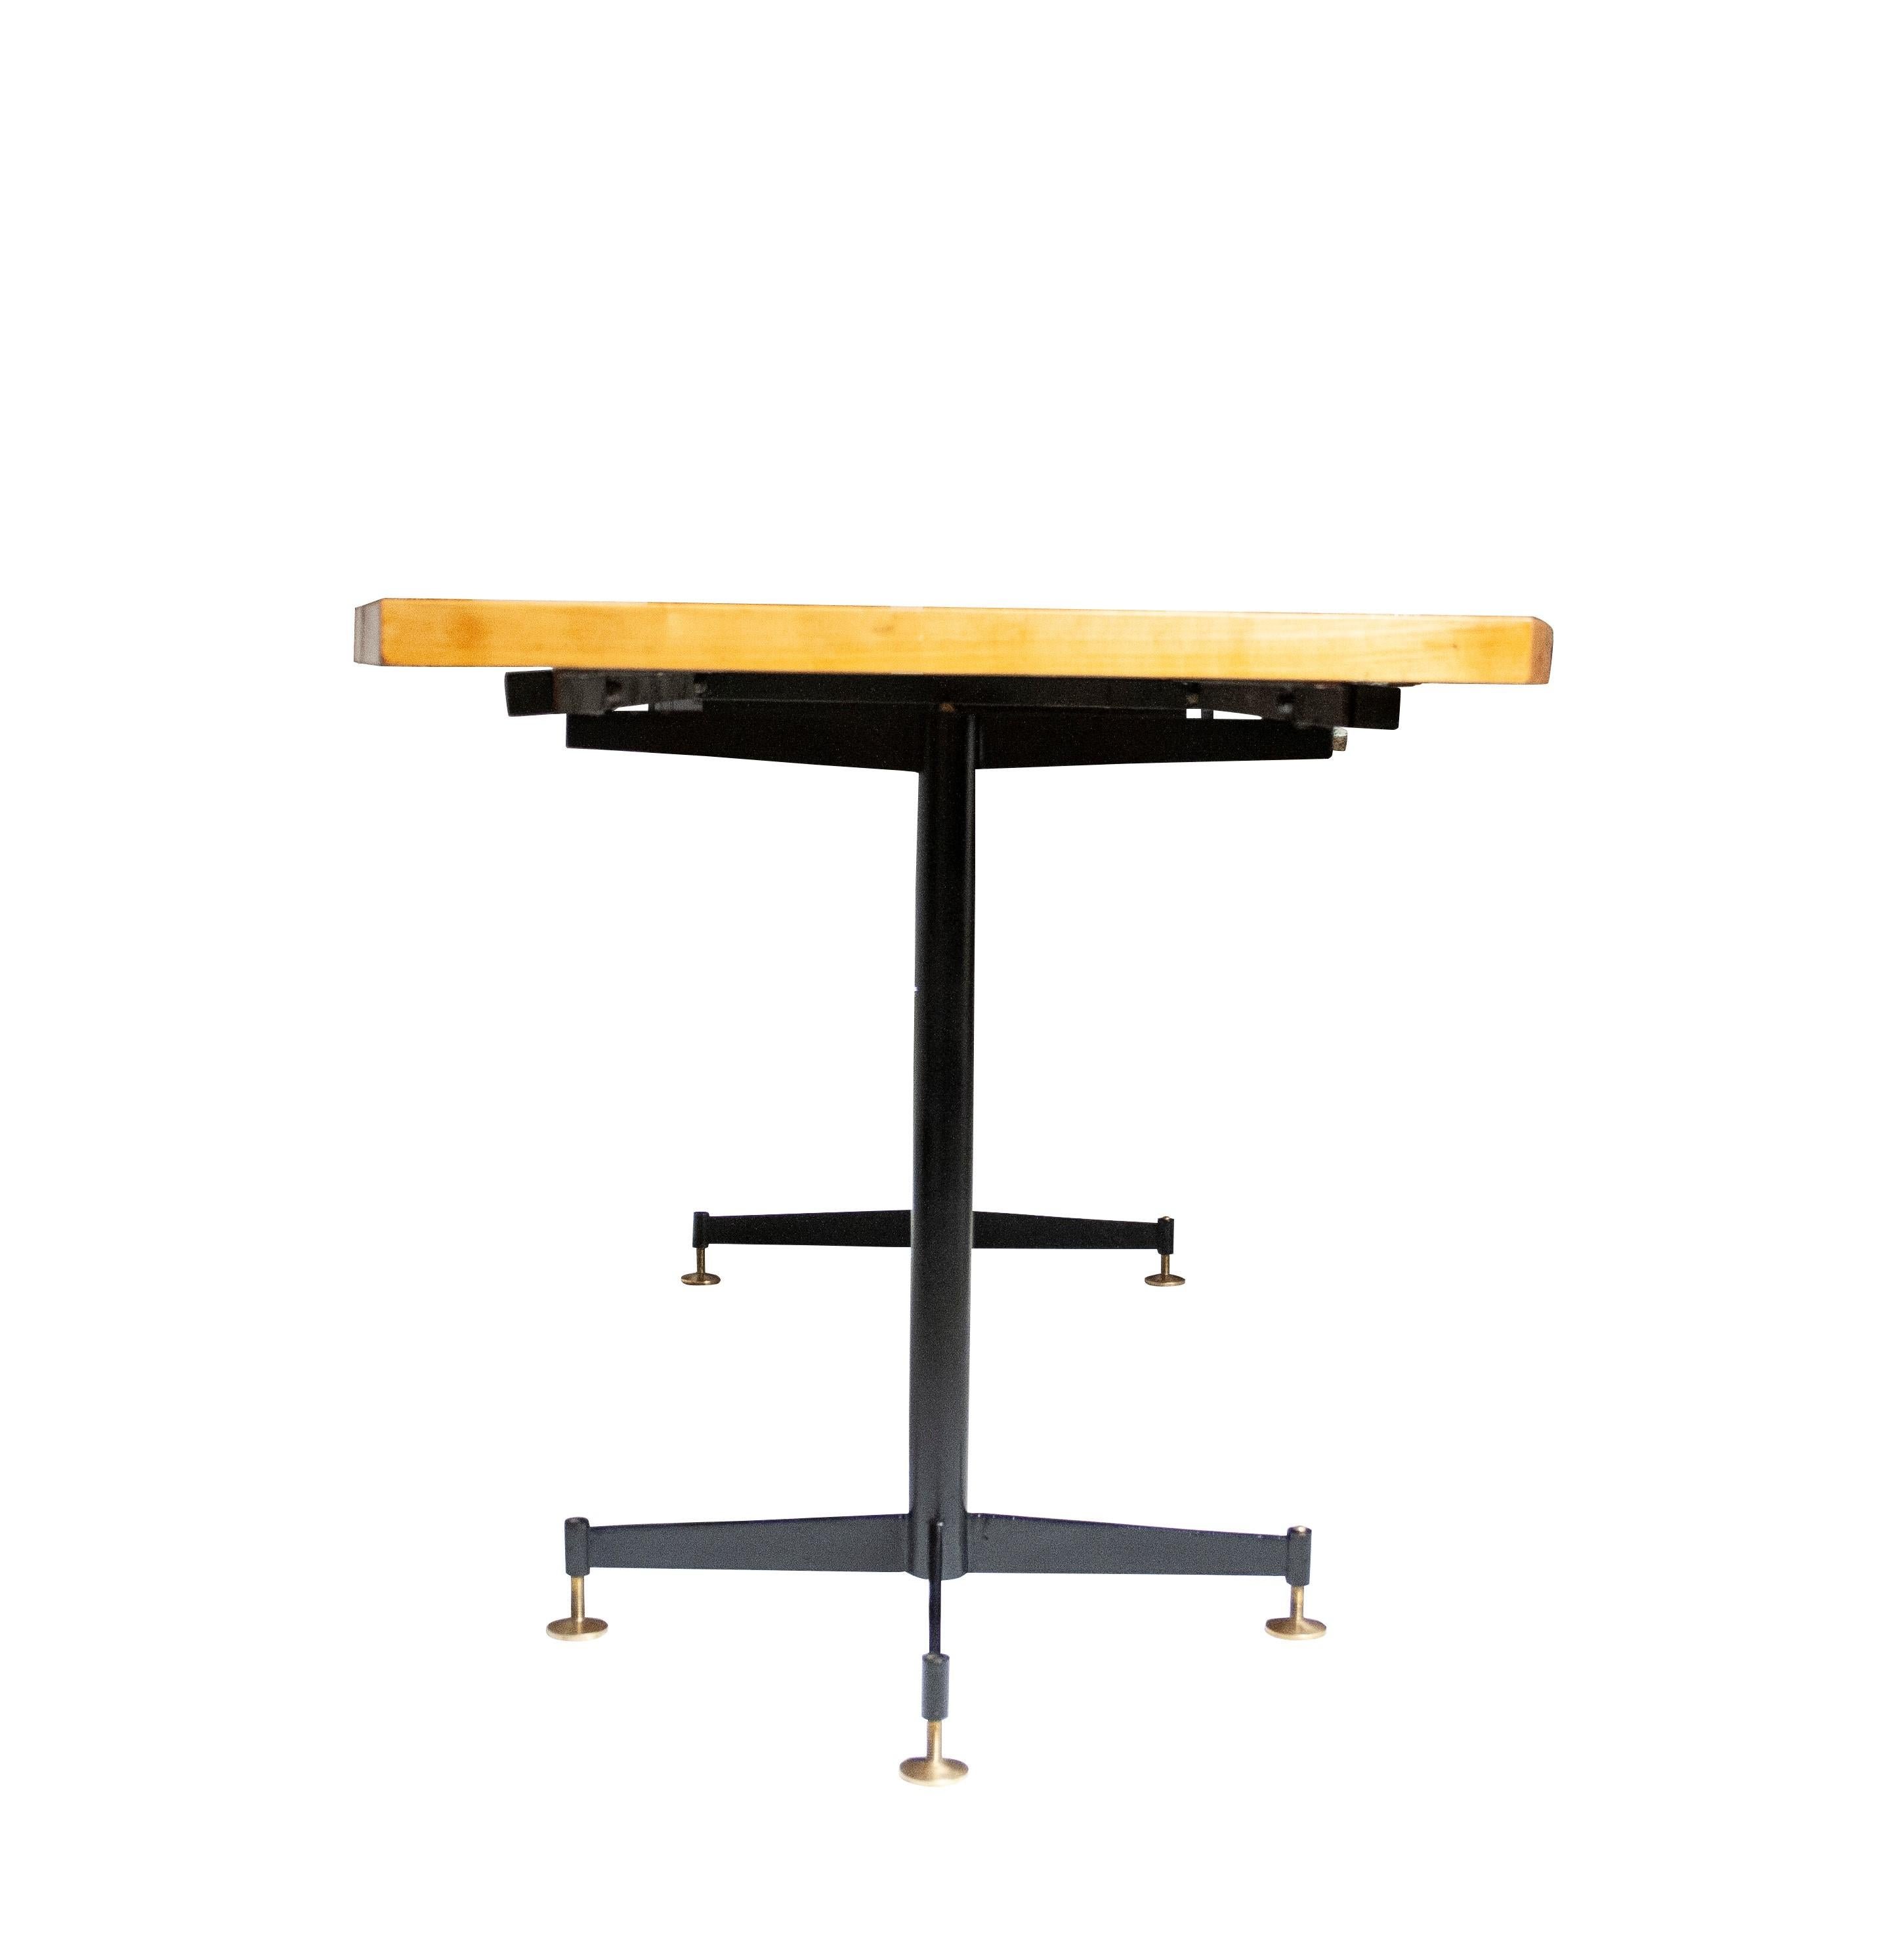 Italian Mid- Century Modern Extendable Table Designed by Luigi Scremin, Italy, 1950. For Sale